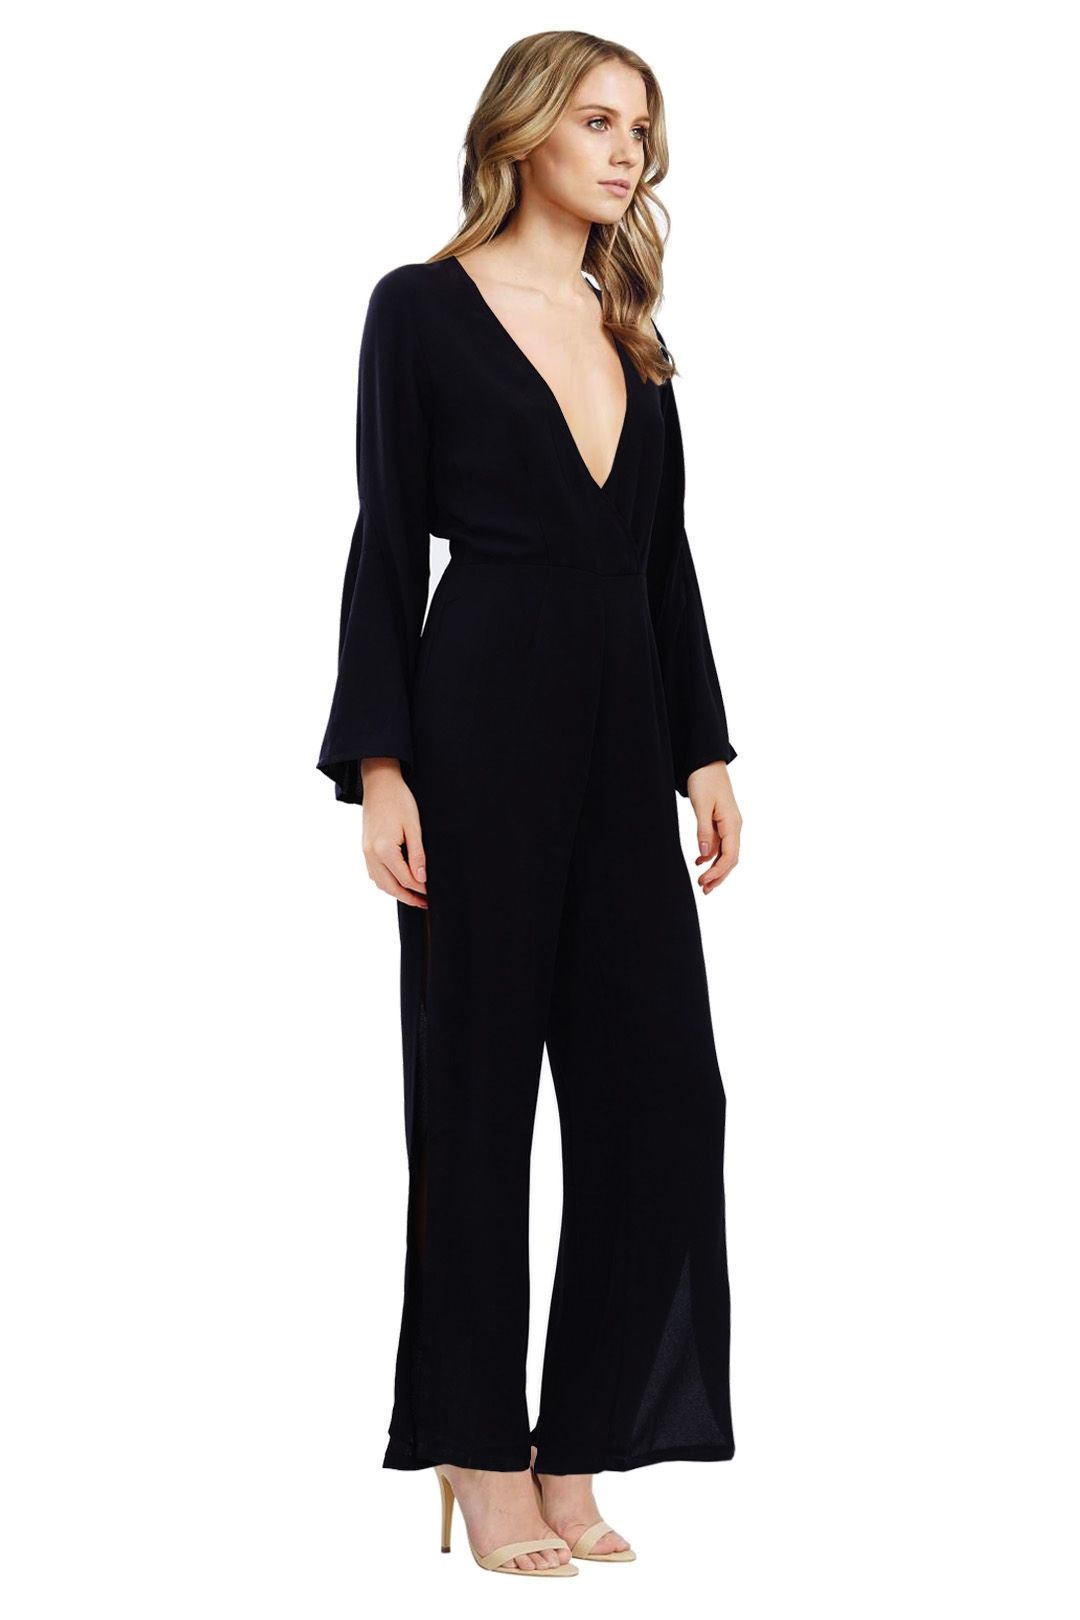 Maurie & Eve - The Runaway Jumpsuit - Black - Side